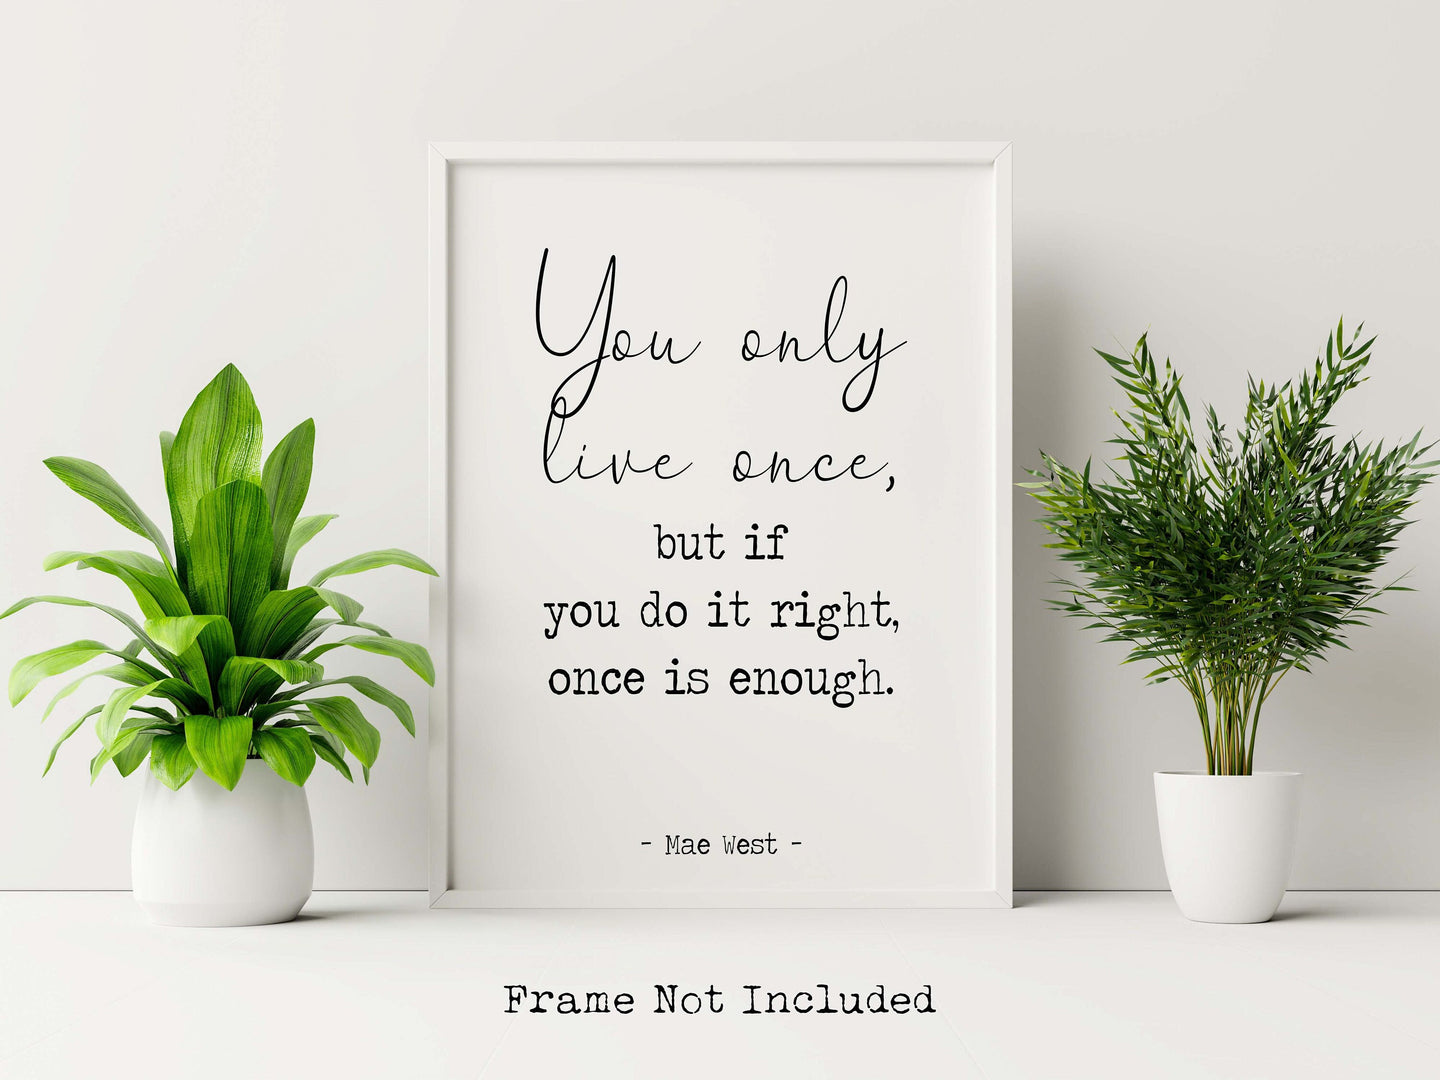 Mae West quote Print - You only live once, but if you do it right, once is enough - Unframed wall art print for Home YOLO print UNFRAMED